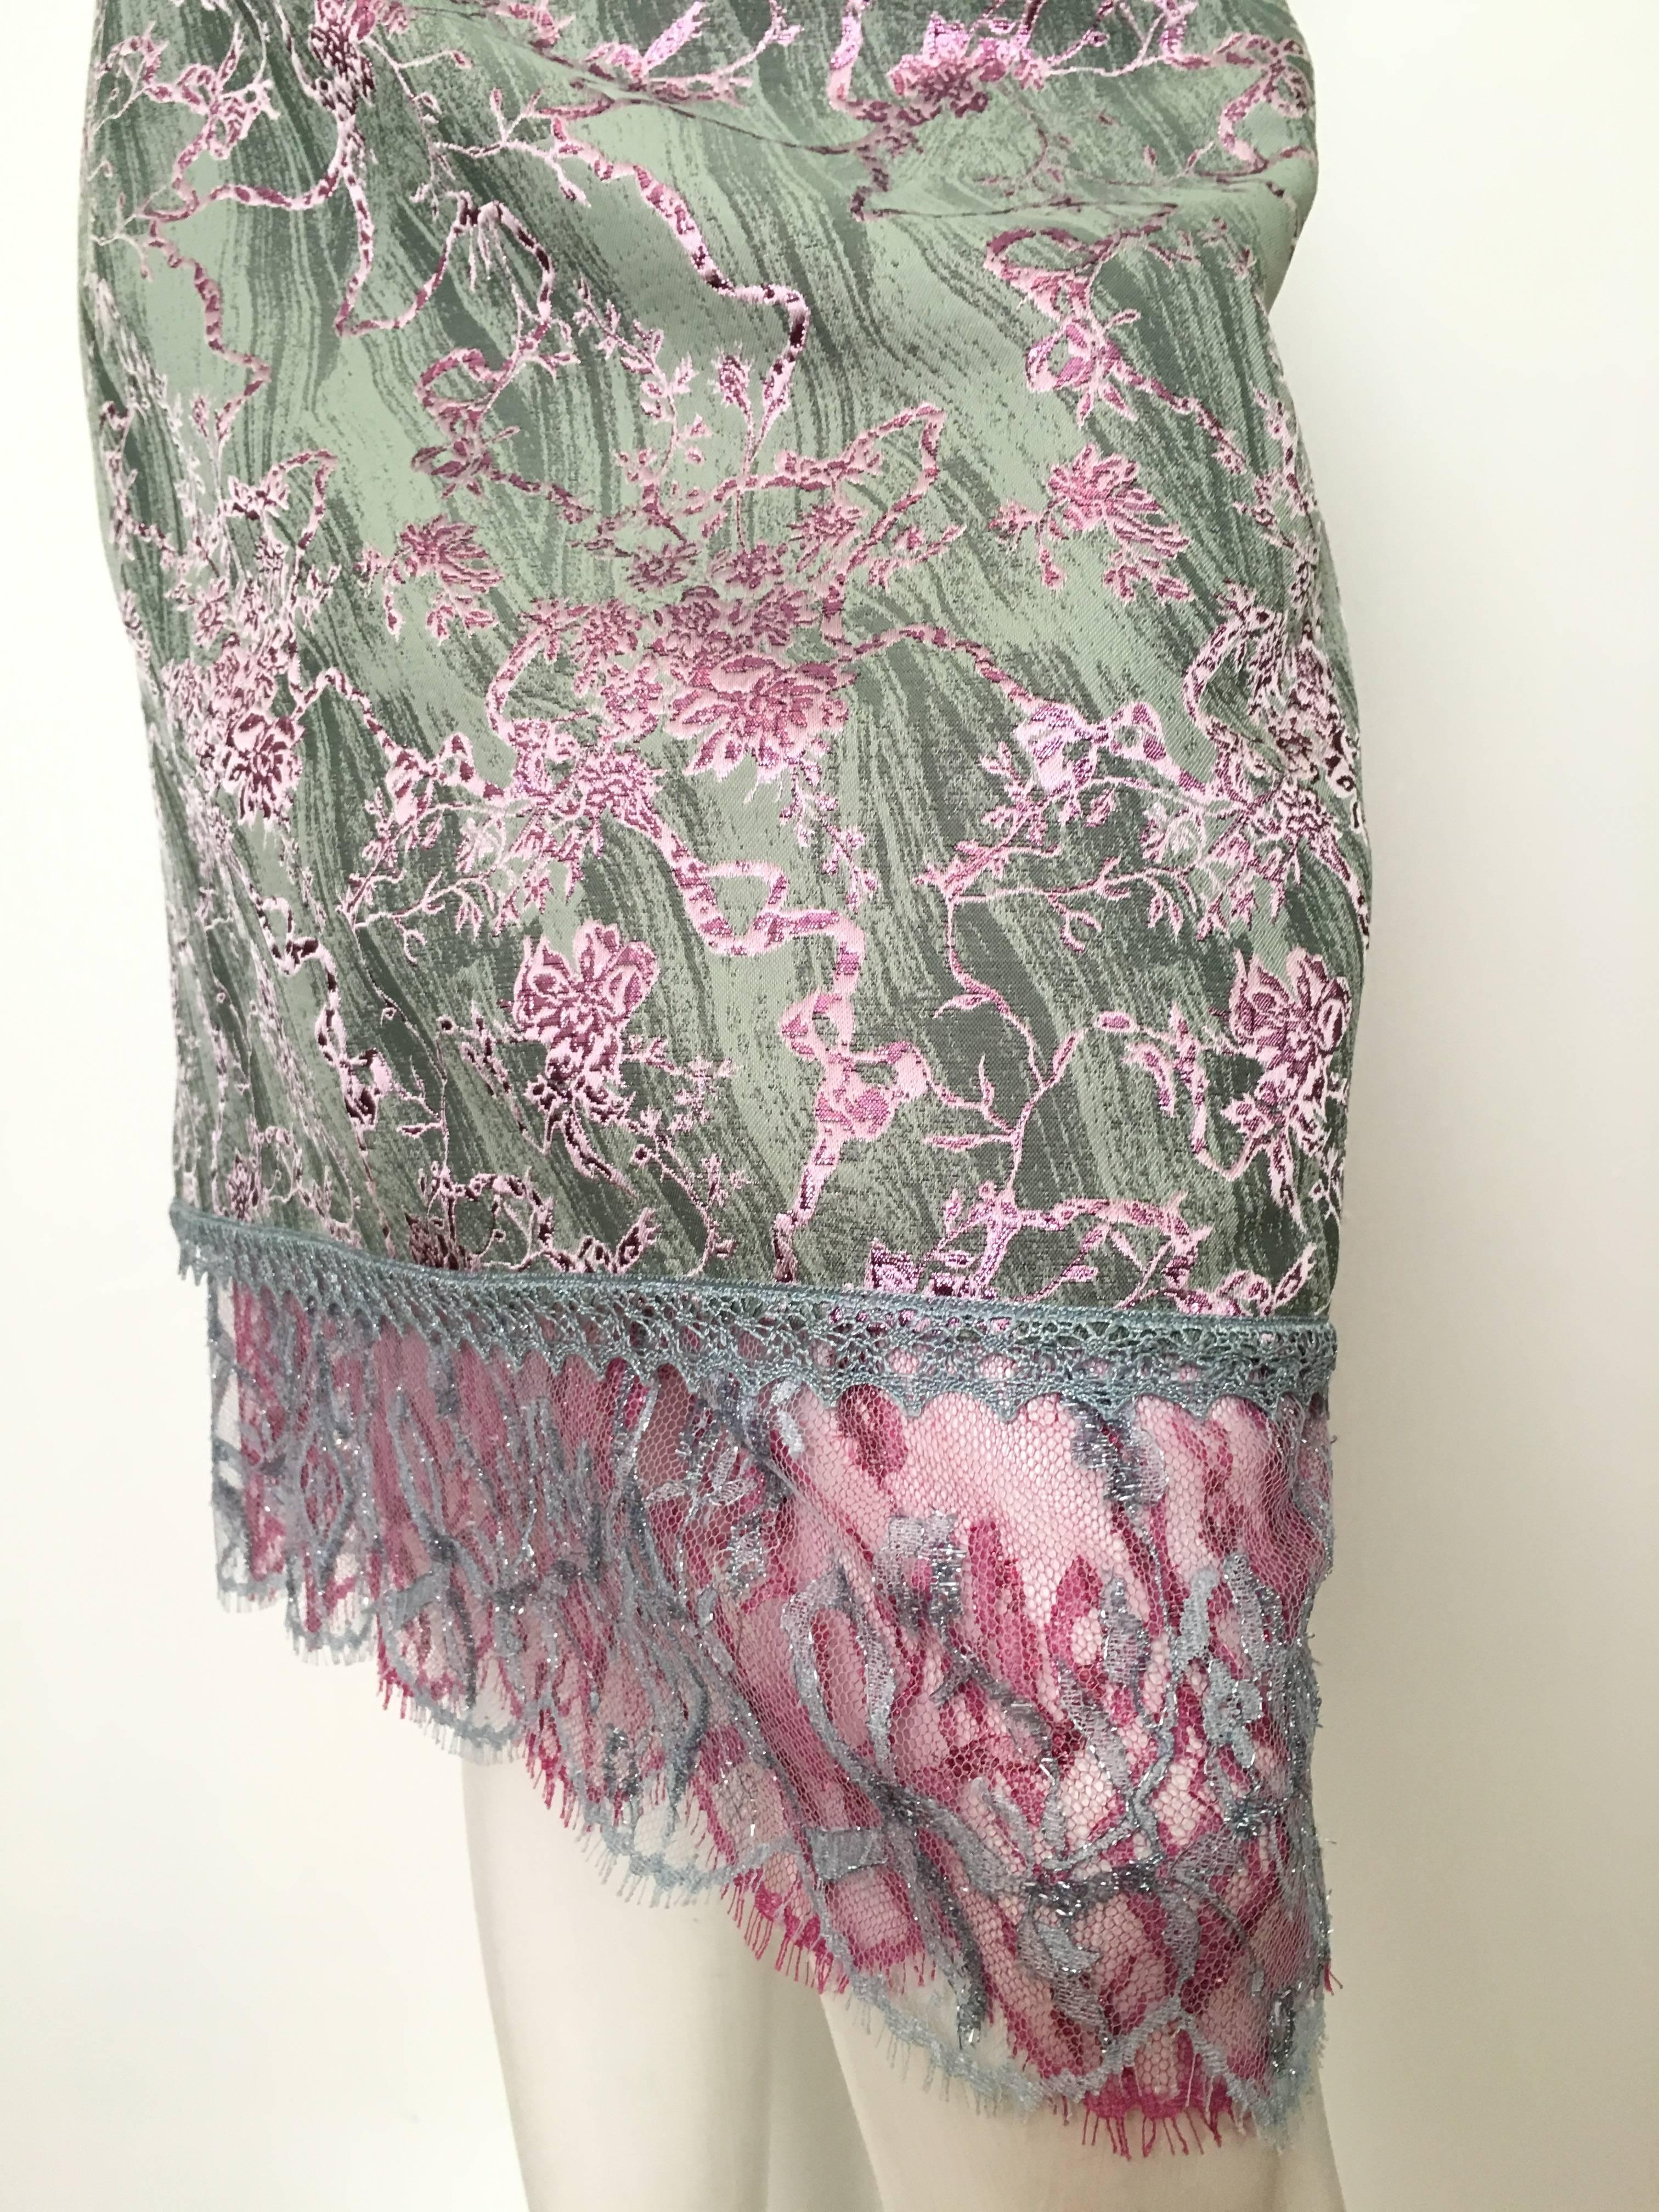 Christian Lacroix 1990s sea form color background with pink metallic floral print & lace trim skirt is a French size 40 and fits an USA size 8.  Ladies please grab your most trusted friend, Mr. Tape Measure, so you can properly measure your waist